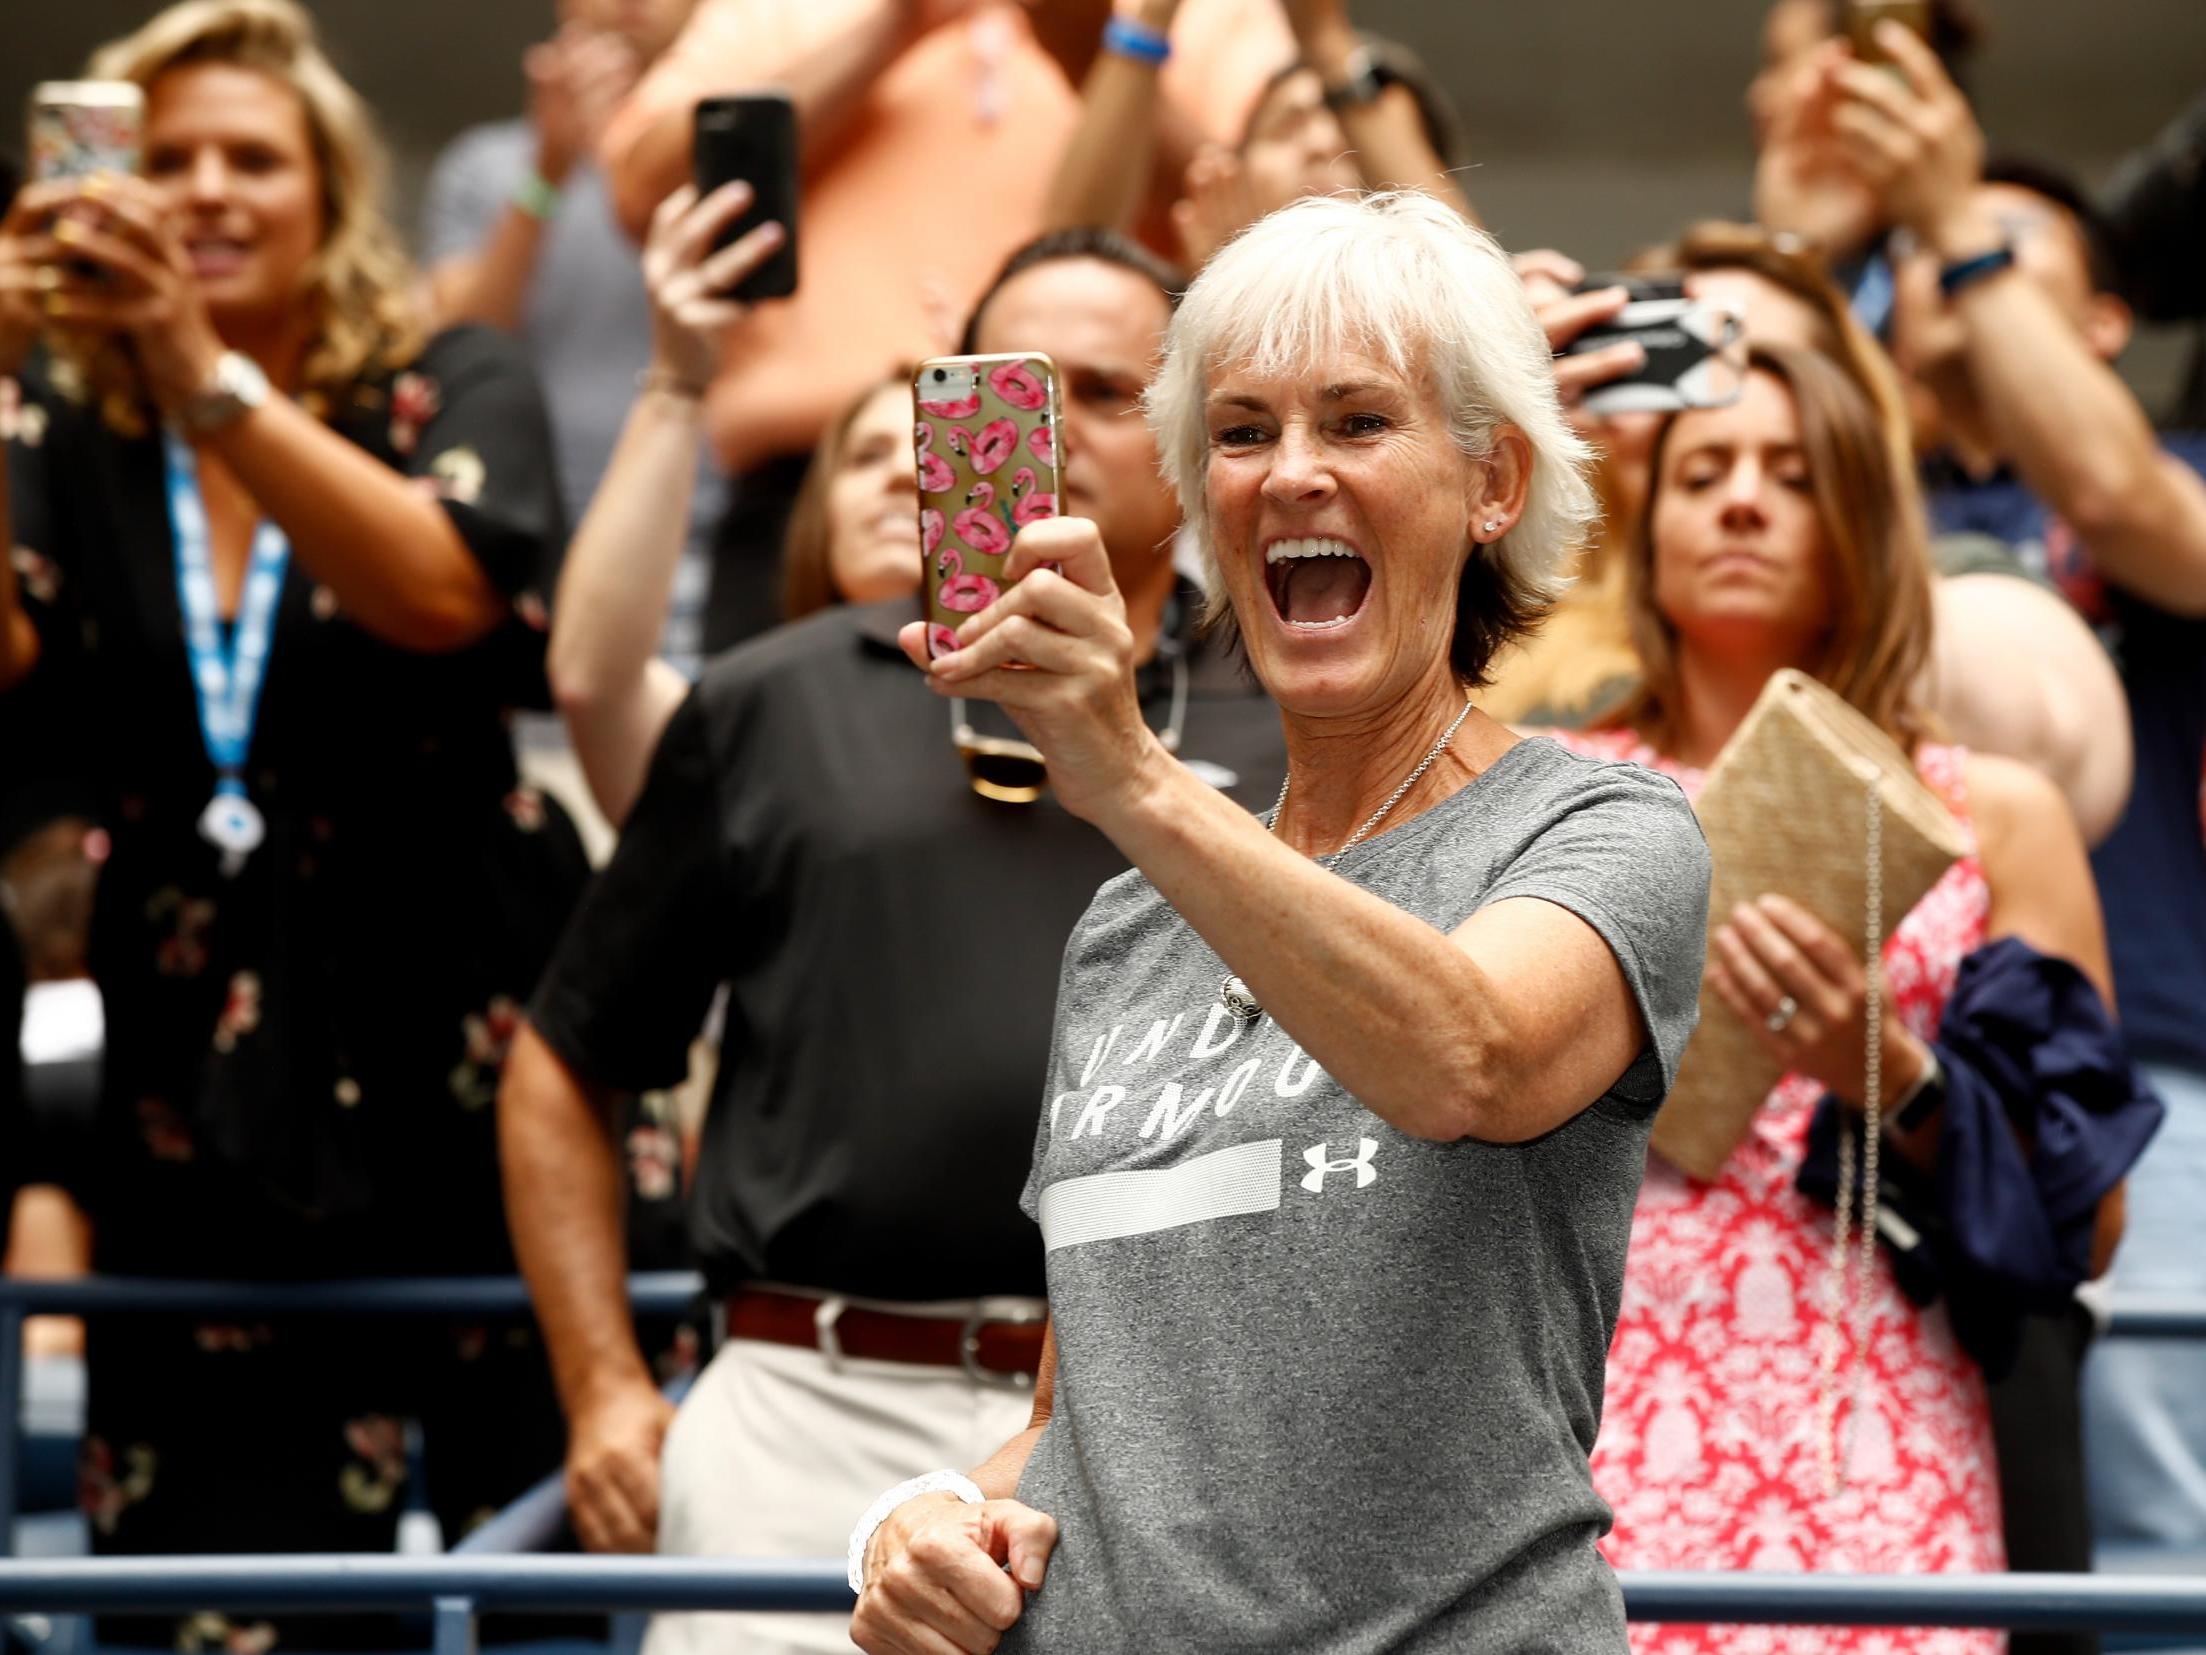 Judy Murray was treated to a rendition of ‘Happy Birthday’ by the crowd